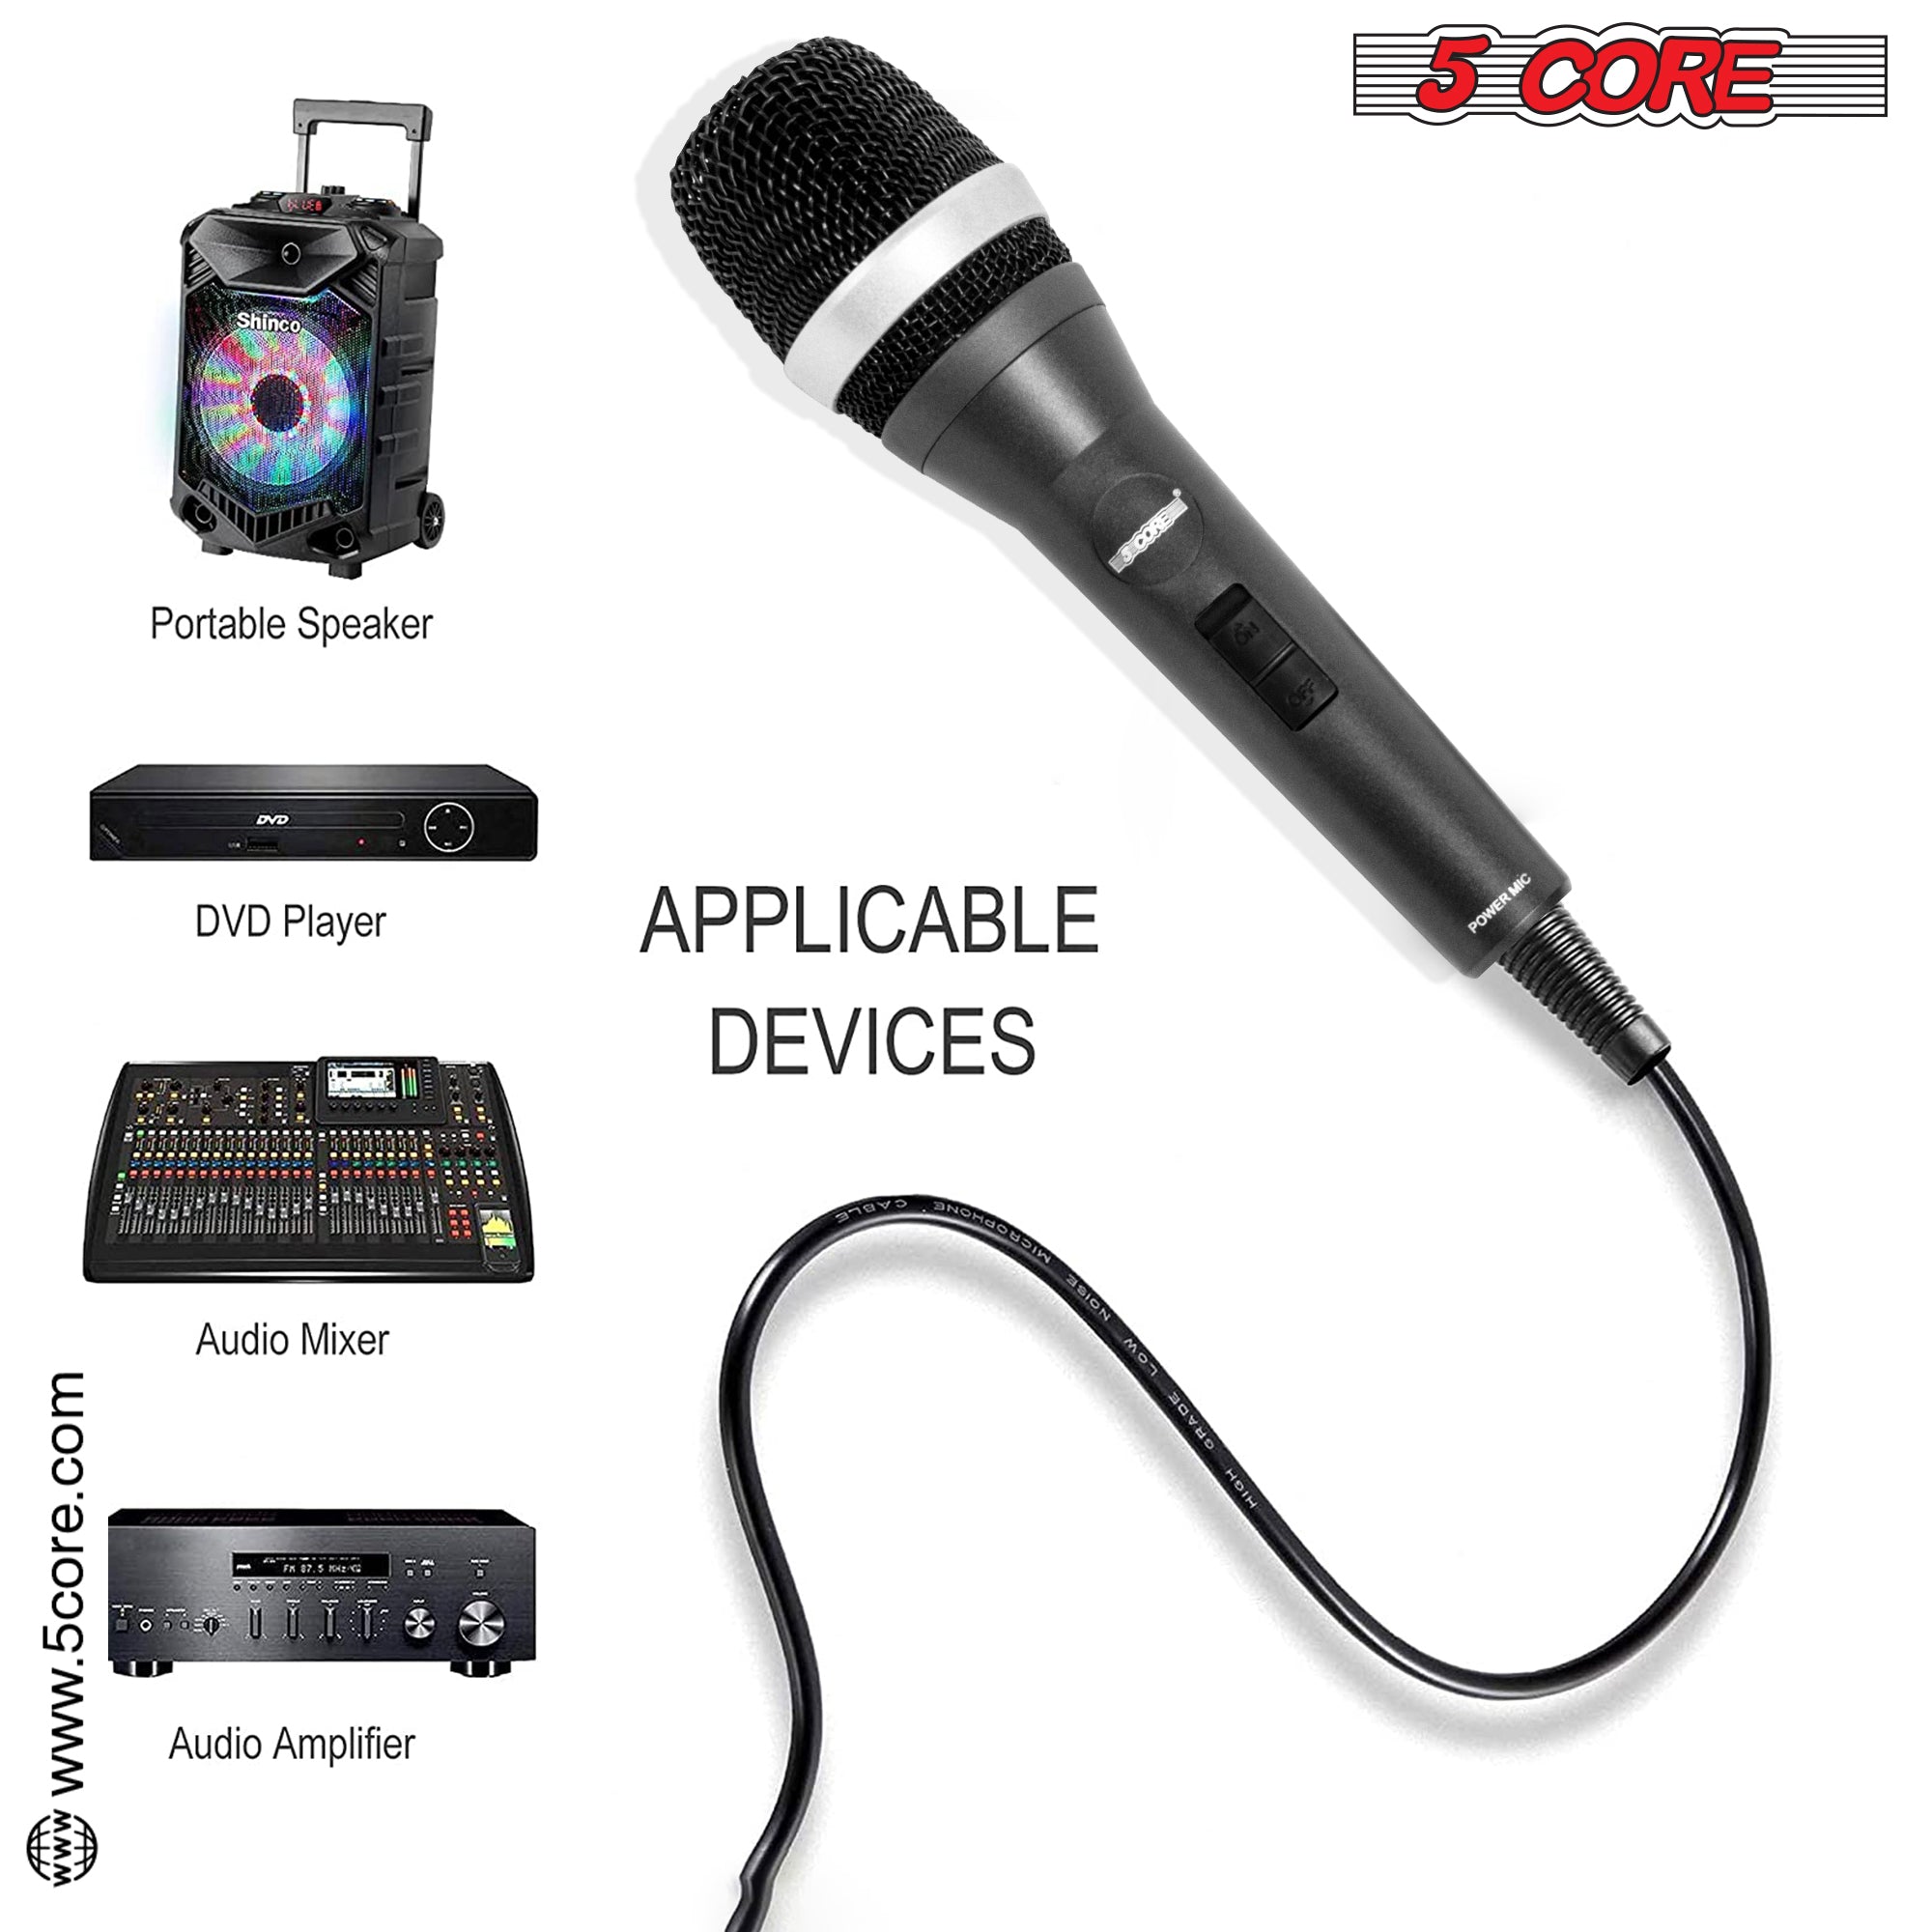 5 Core Karaoke Microphone Dynamic Vocal Handheld Mic Cardioid Unidirectional Microfono w On and Off Switch Includes XLR Audio Cable Bag Mic Holder -5C-POWER